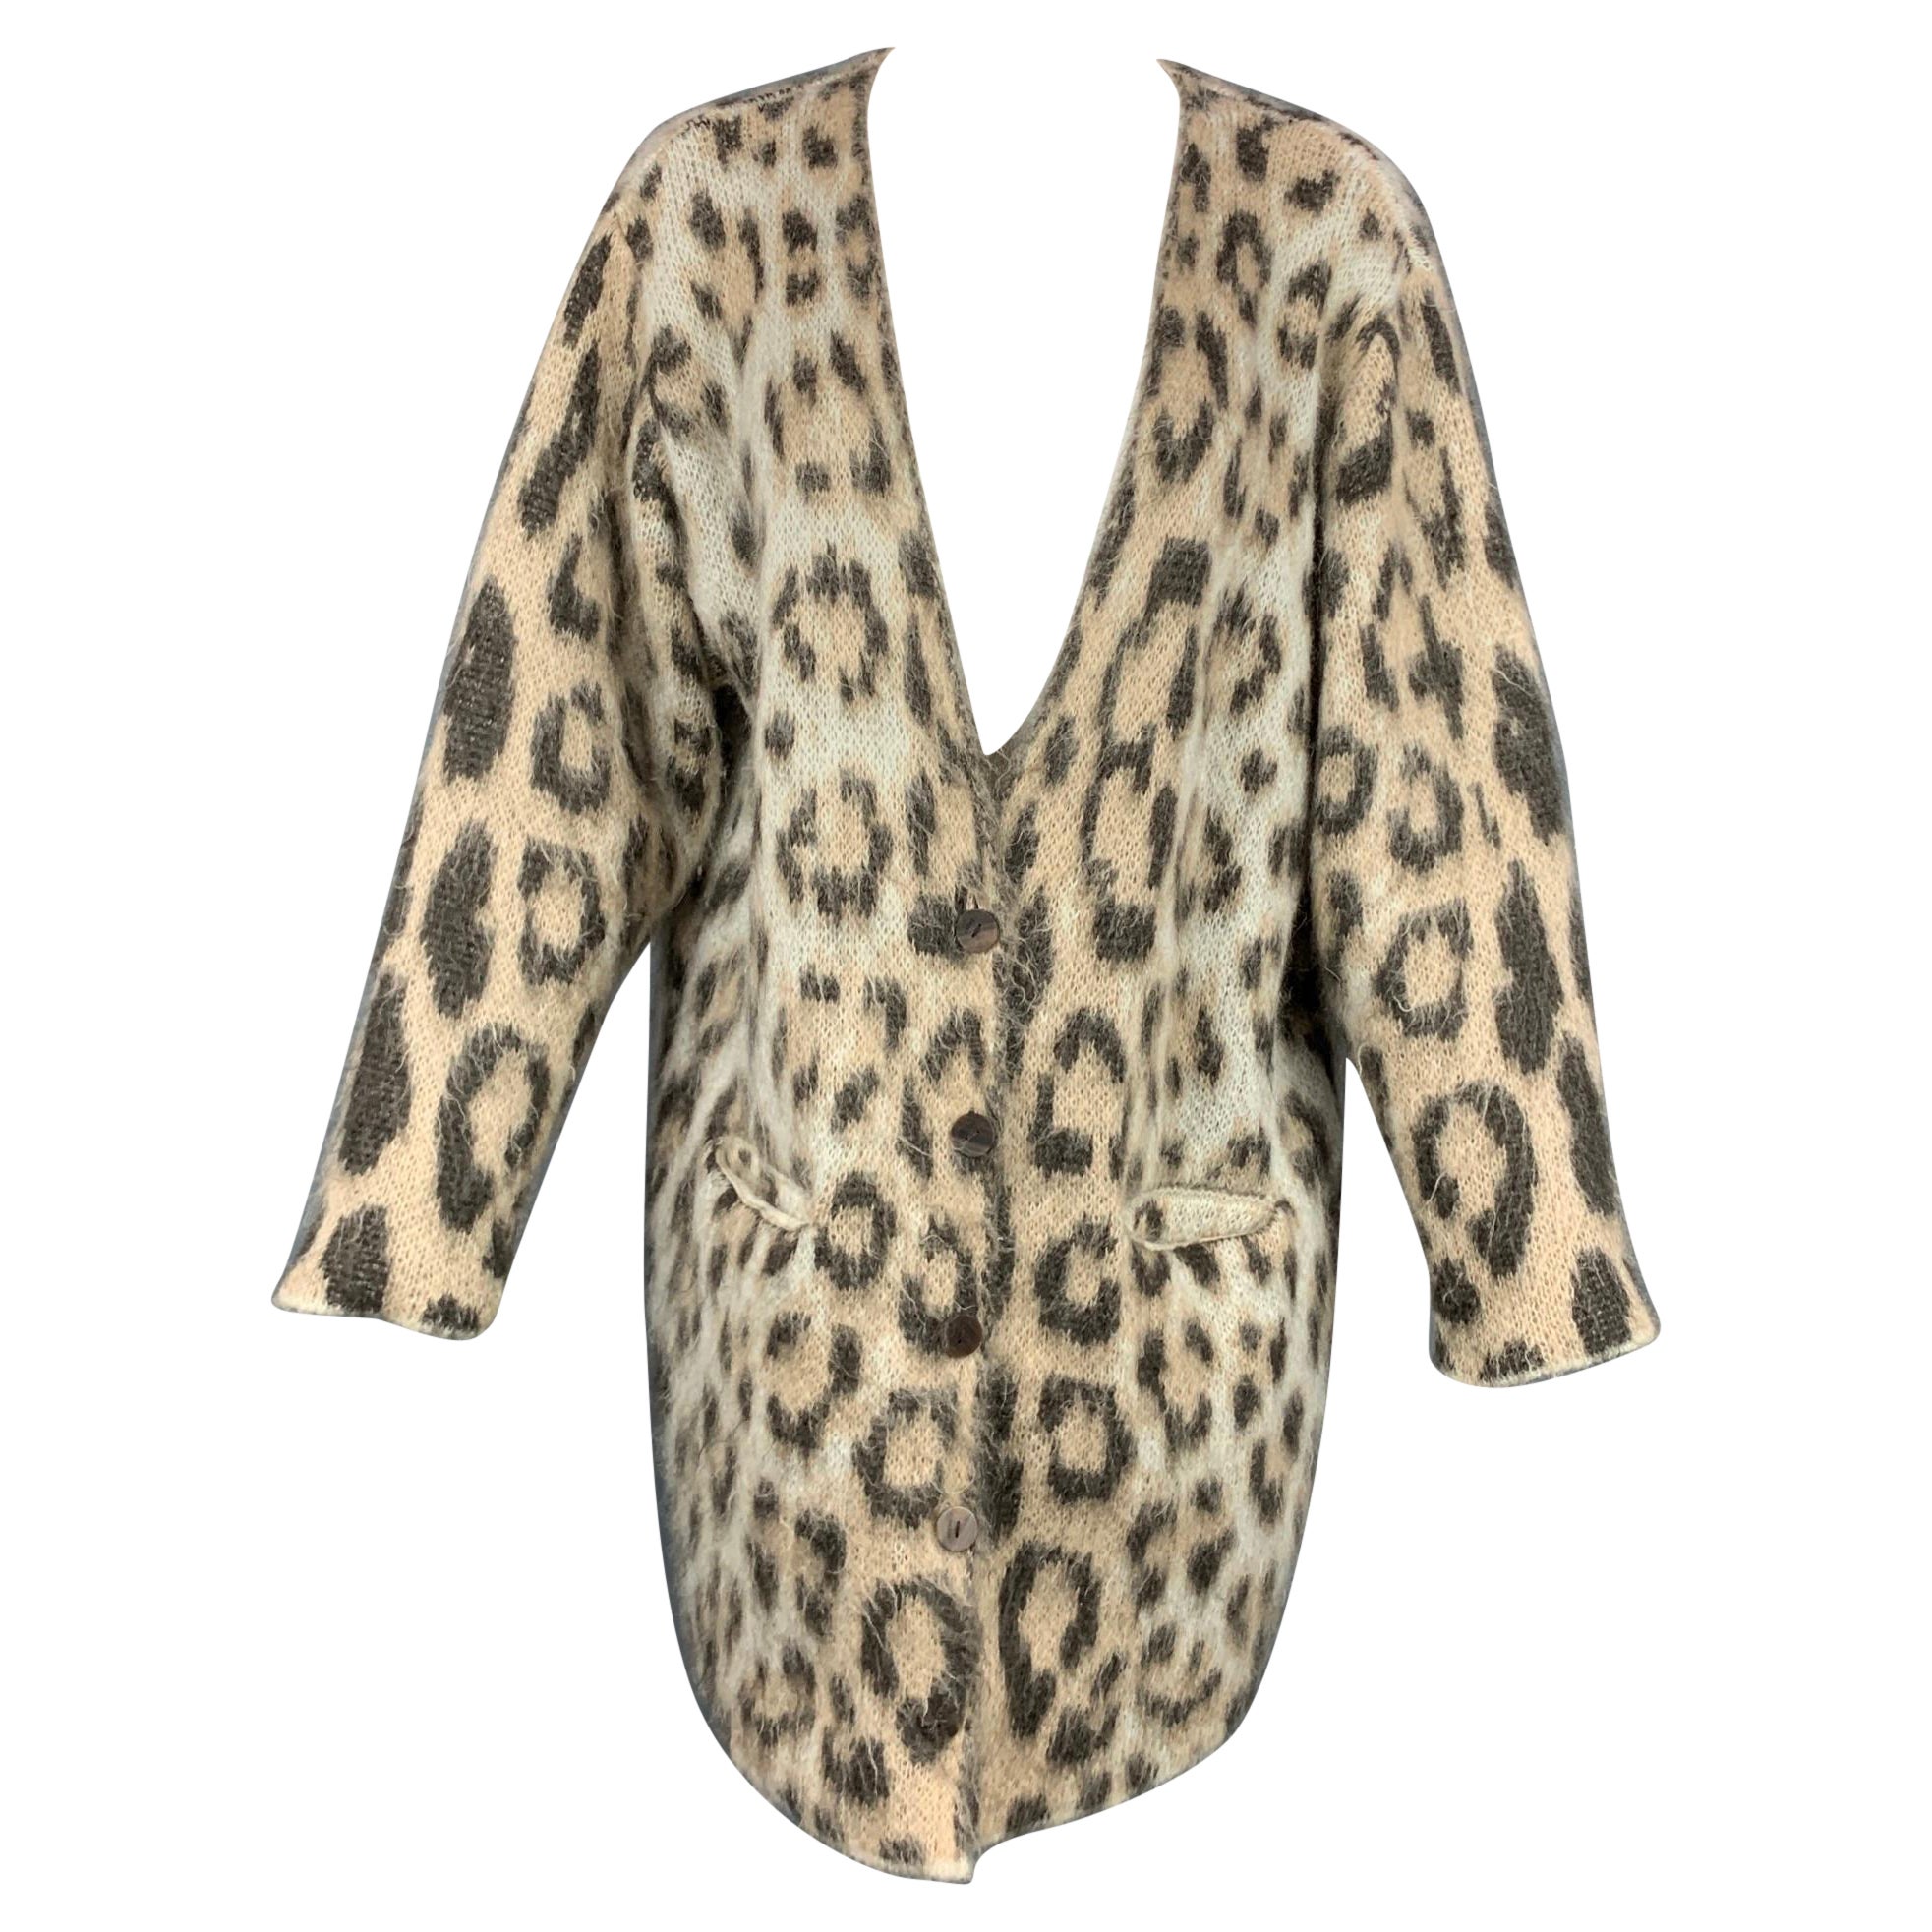 LOEWE Size XS Taupe Mohair Blend Leopard Print Long Cardigan